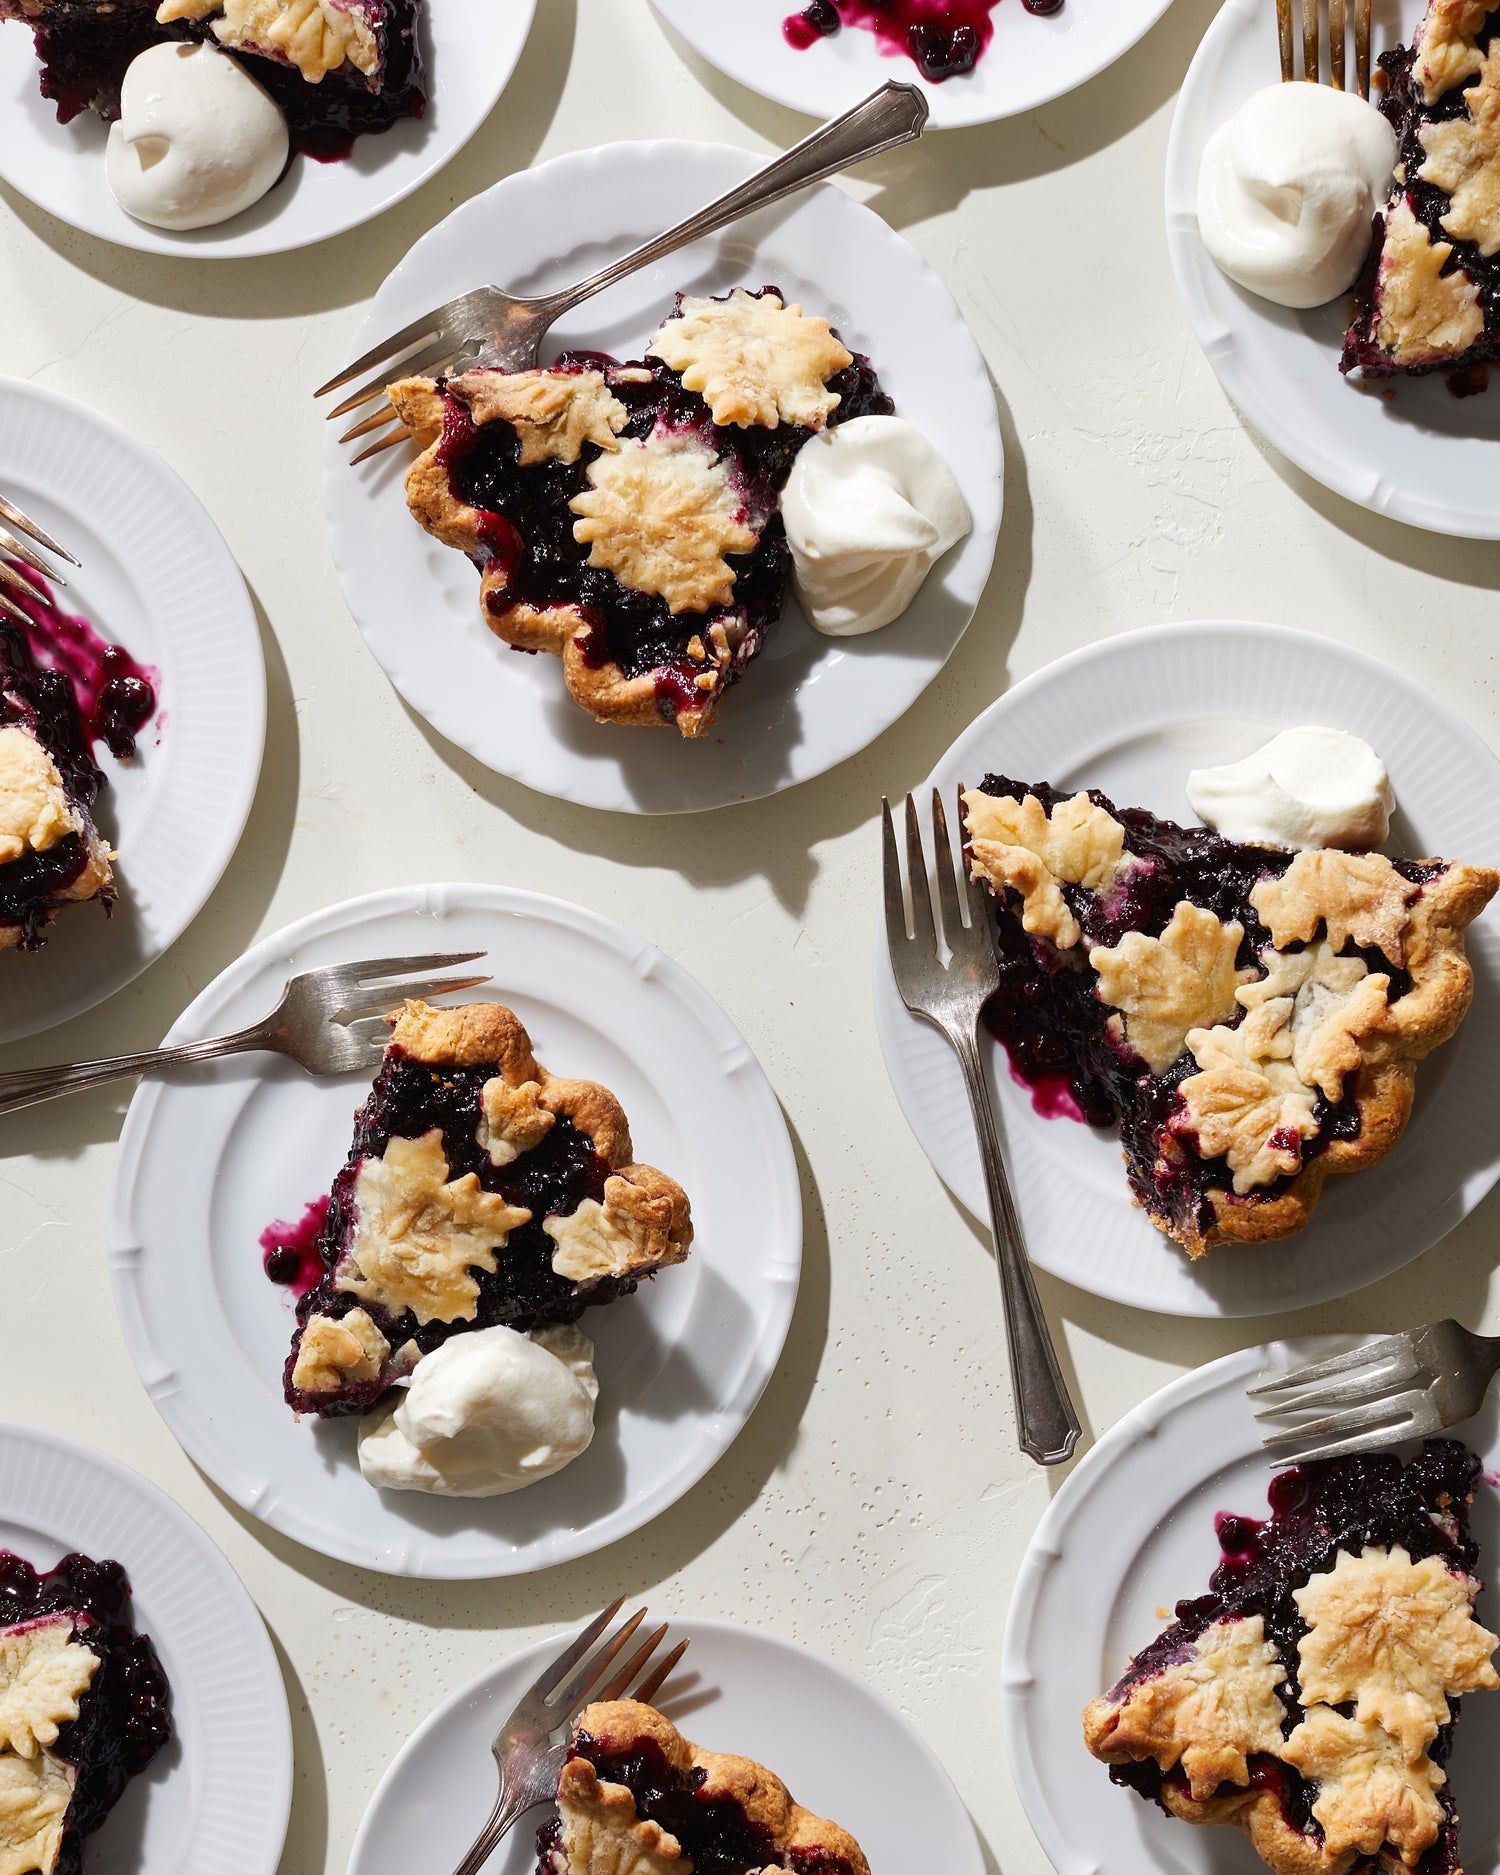 Blueberry Pie with Salted Whipped Cream